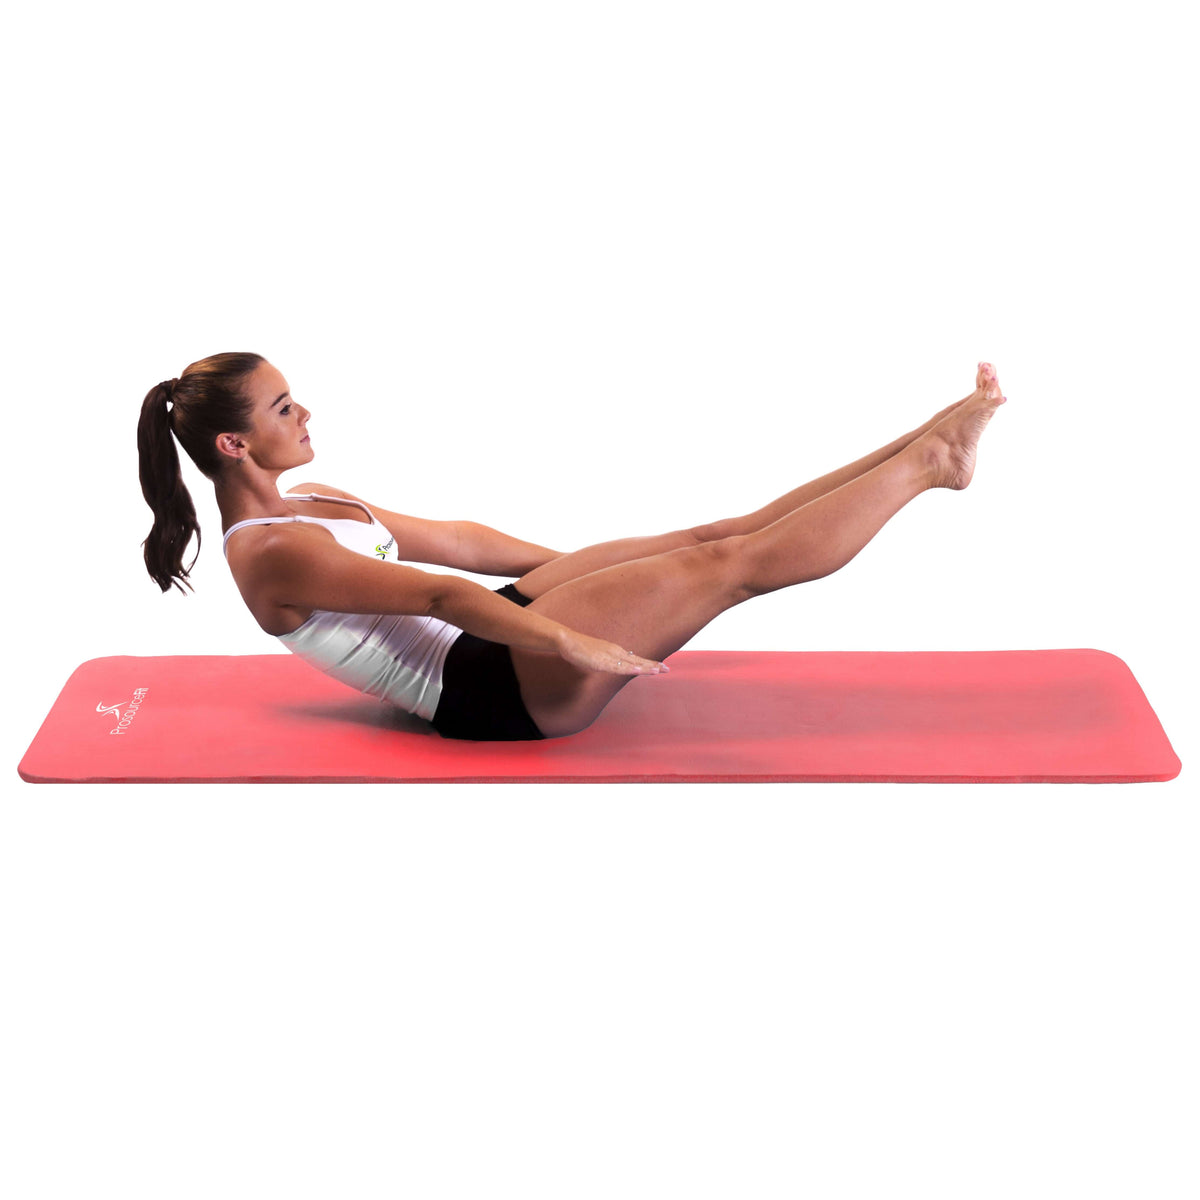 Extra Thick Yoga and Pilates Mat 0.5 inch by Jupiter Gear